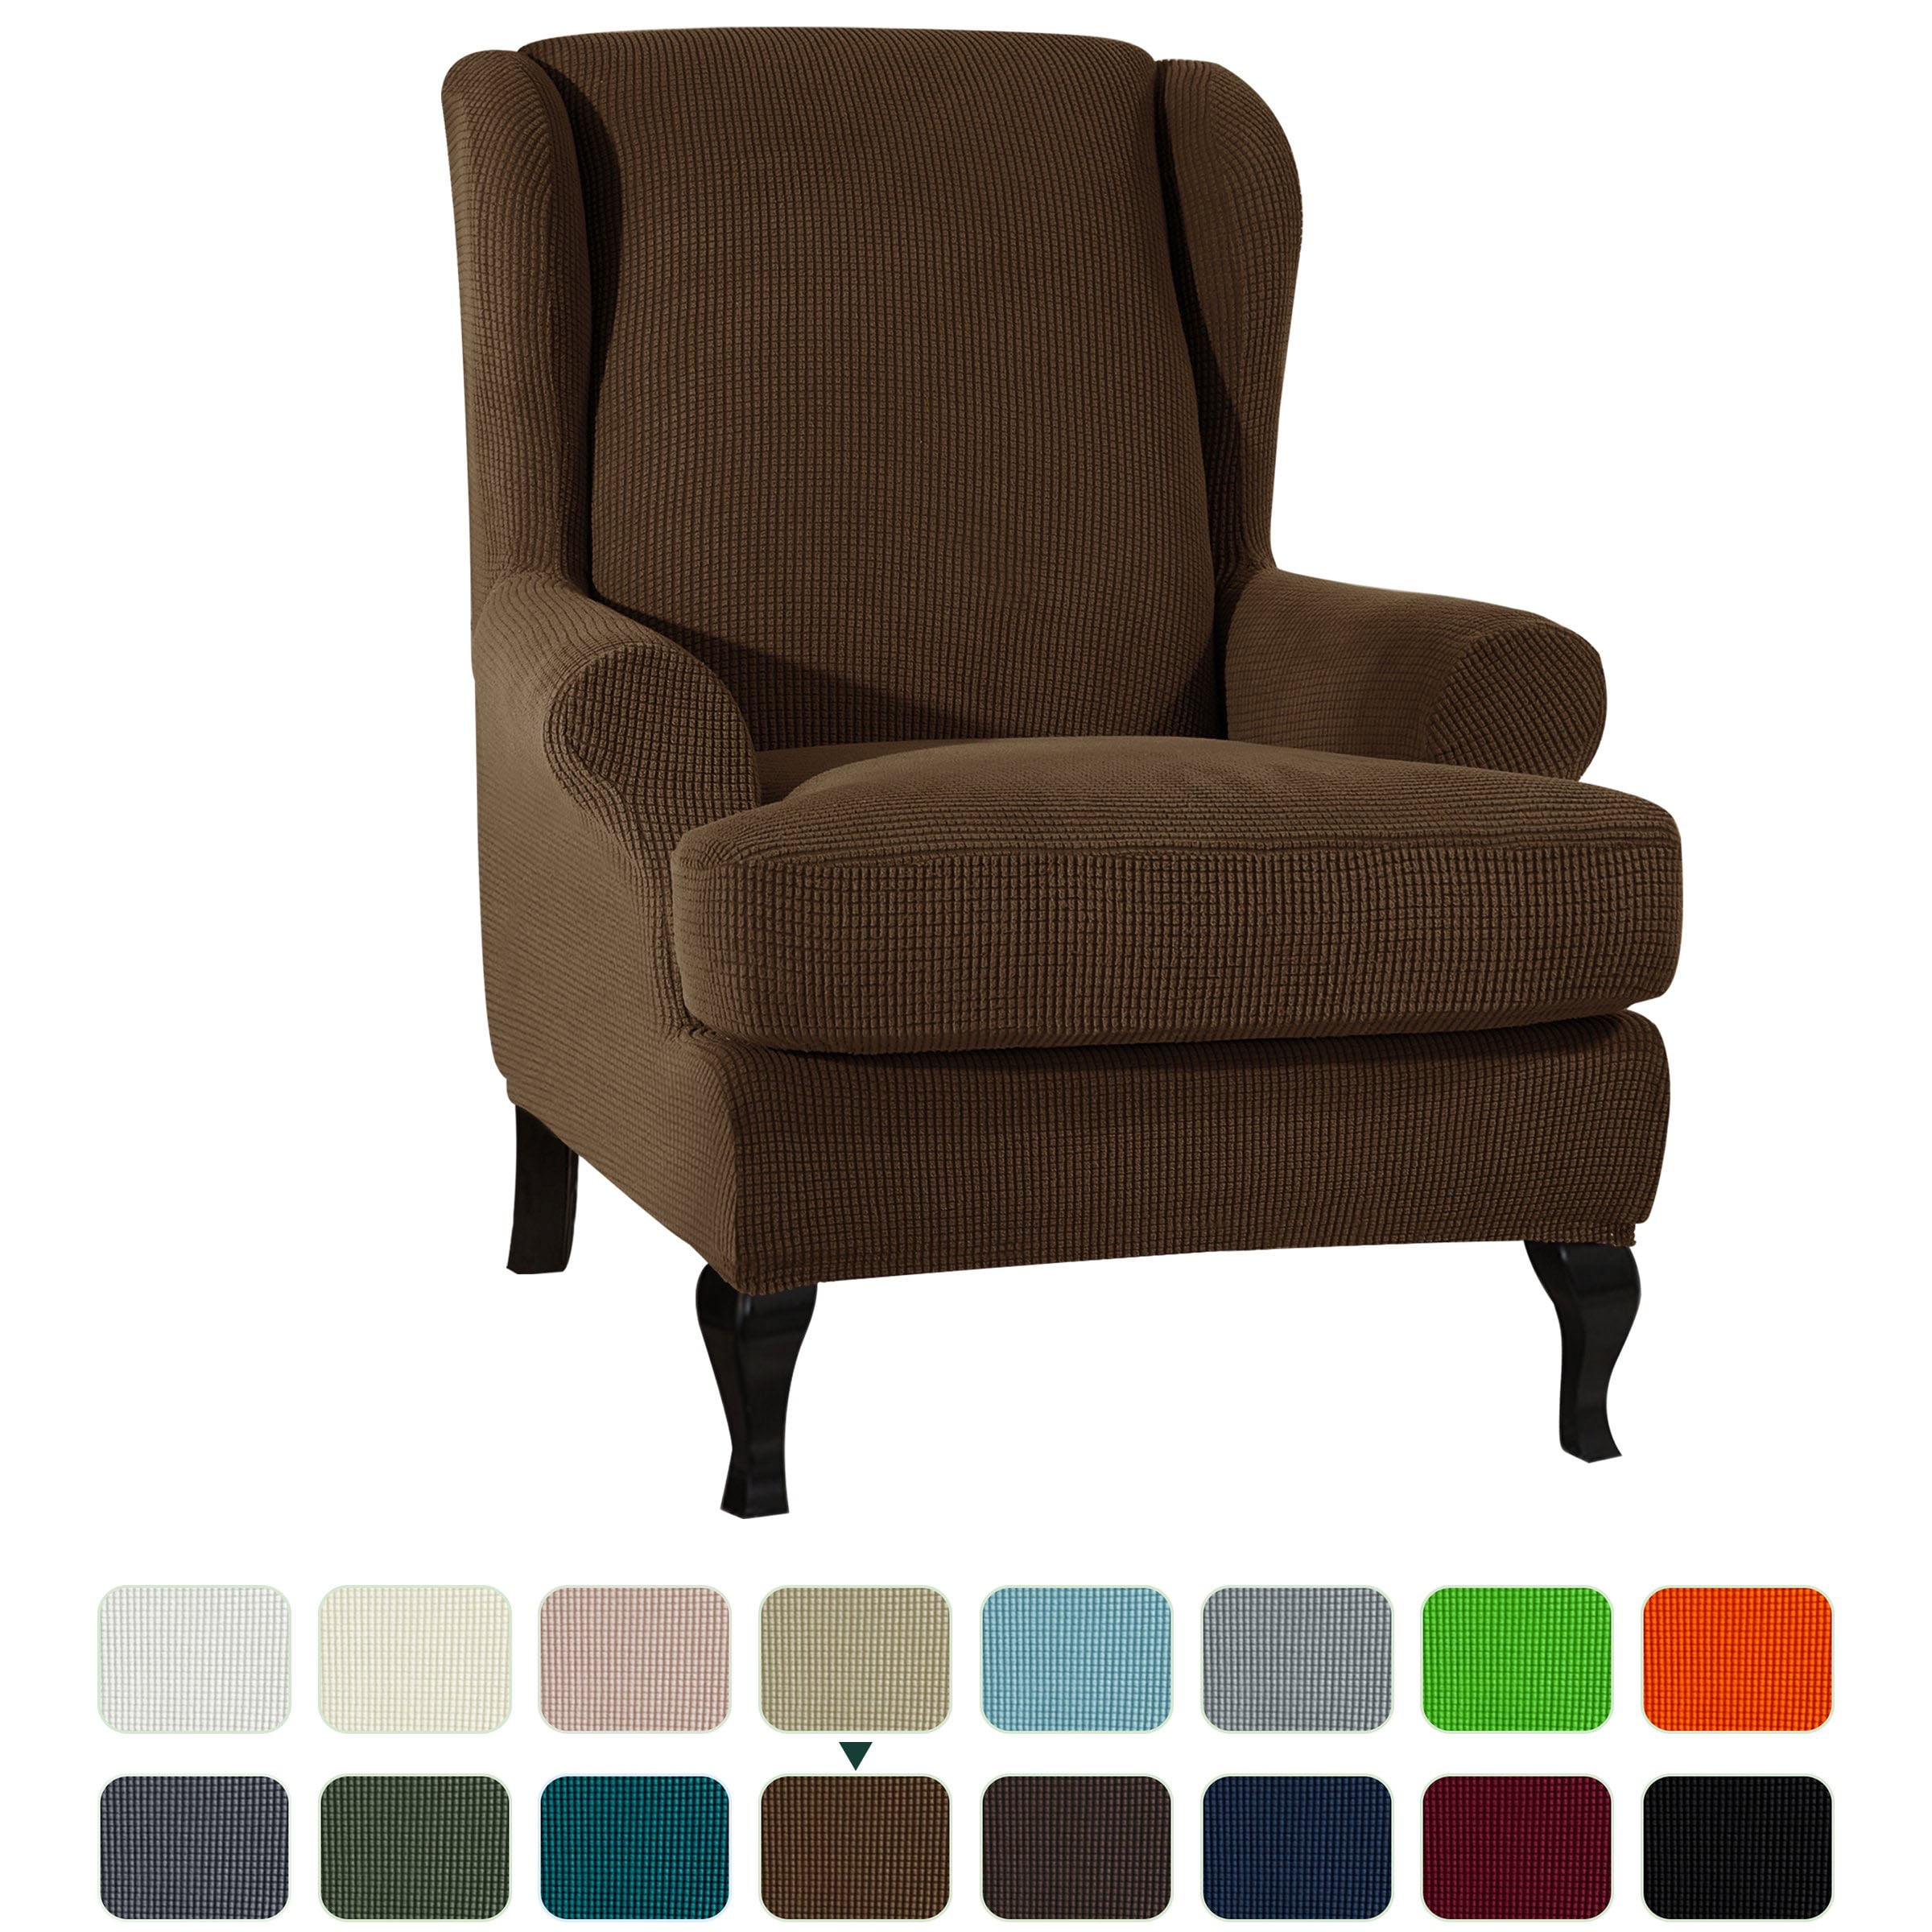 Details about   Velvet Wingback Chair Cover Arm Chair Protector Seat Covers Slipcovers Decor